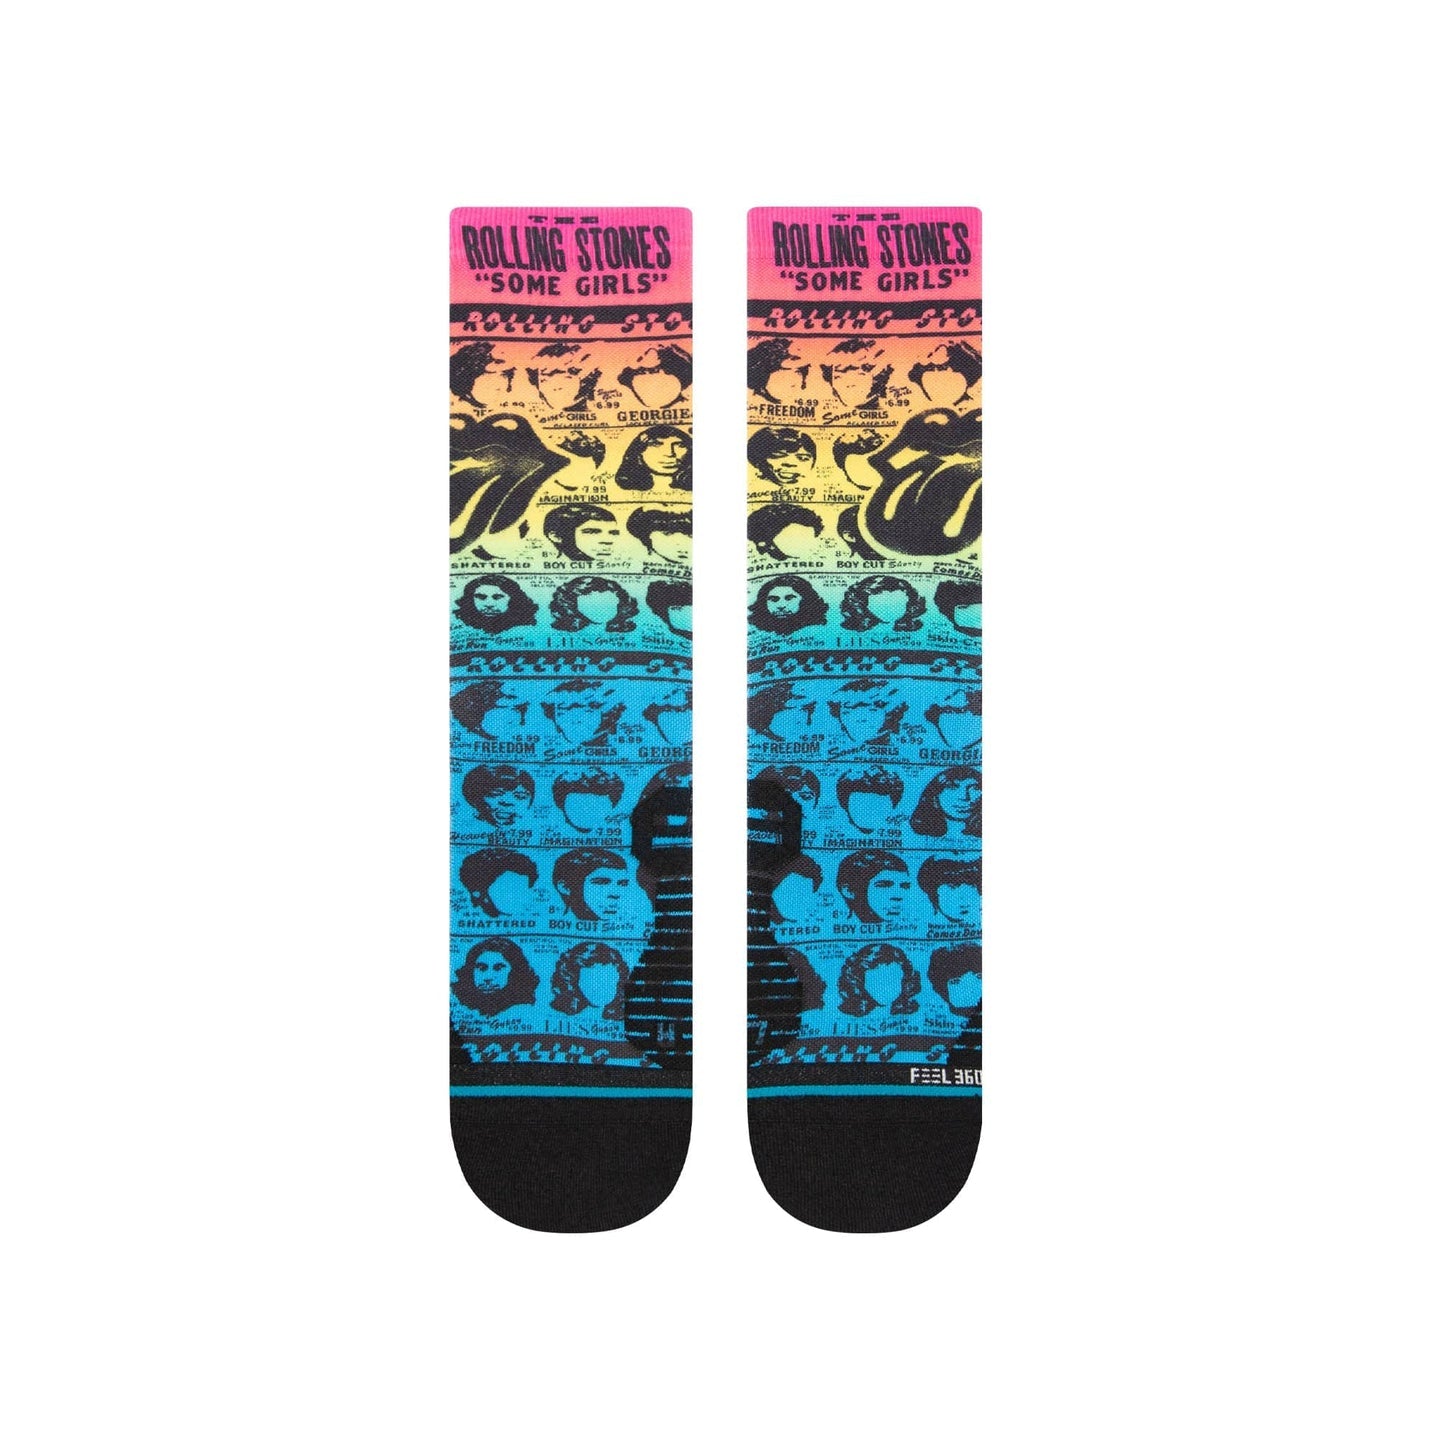 THE ROLLING STONES X STANCE Athletic Crew Socks